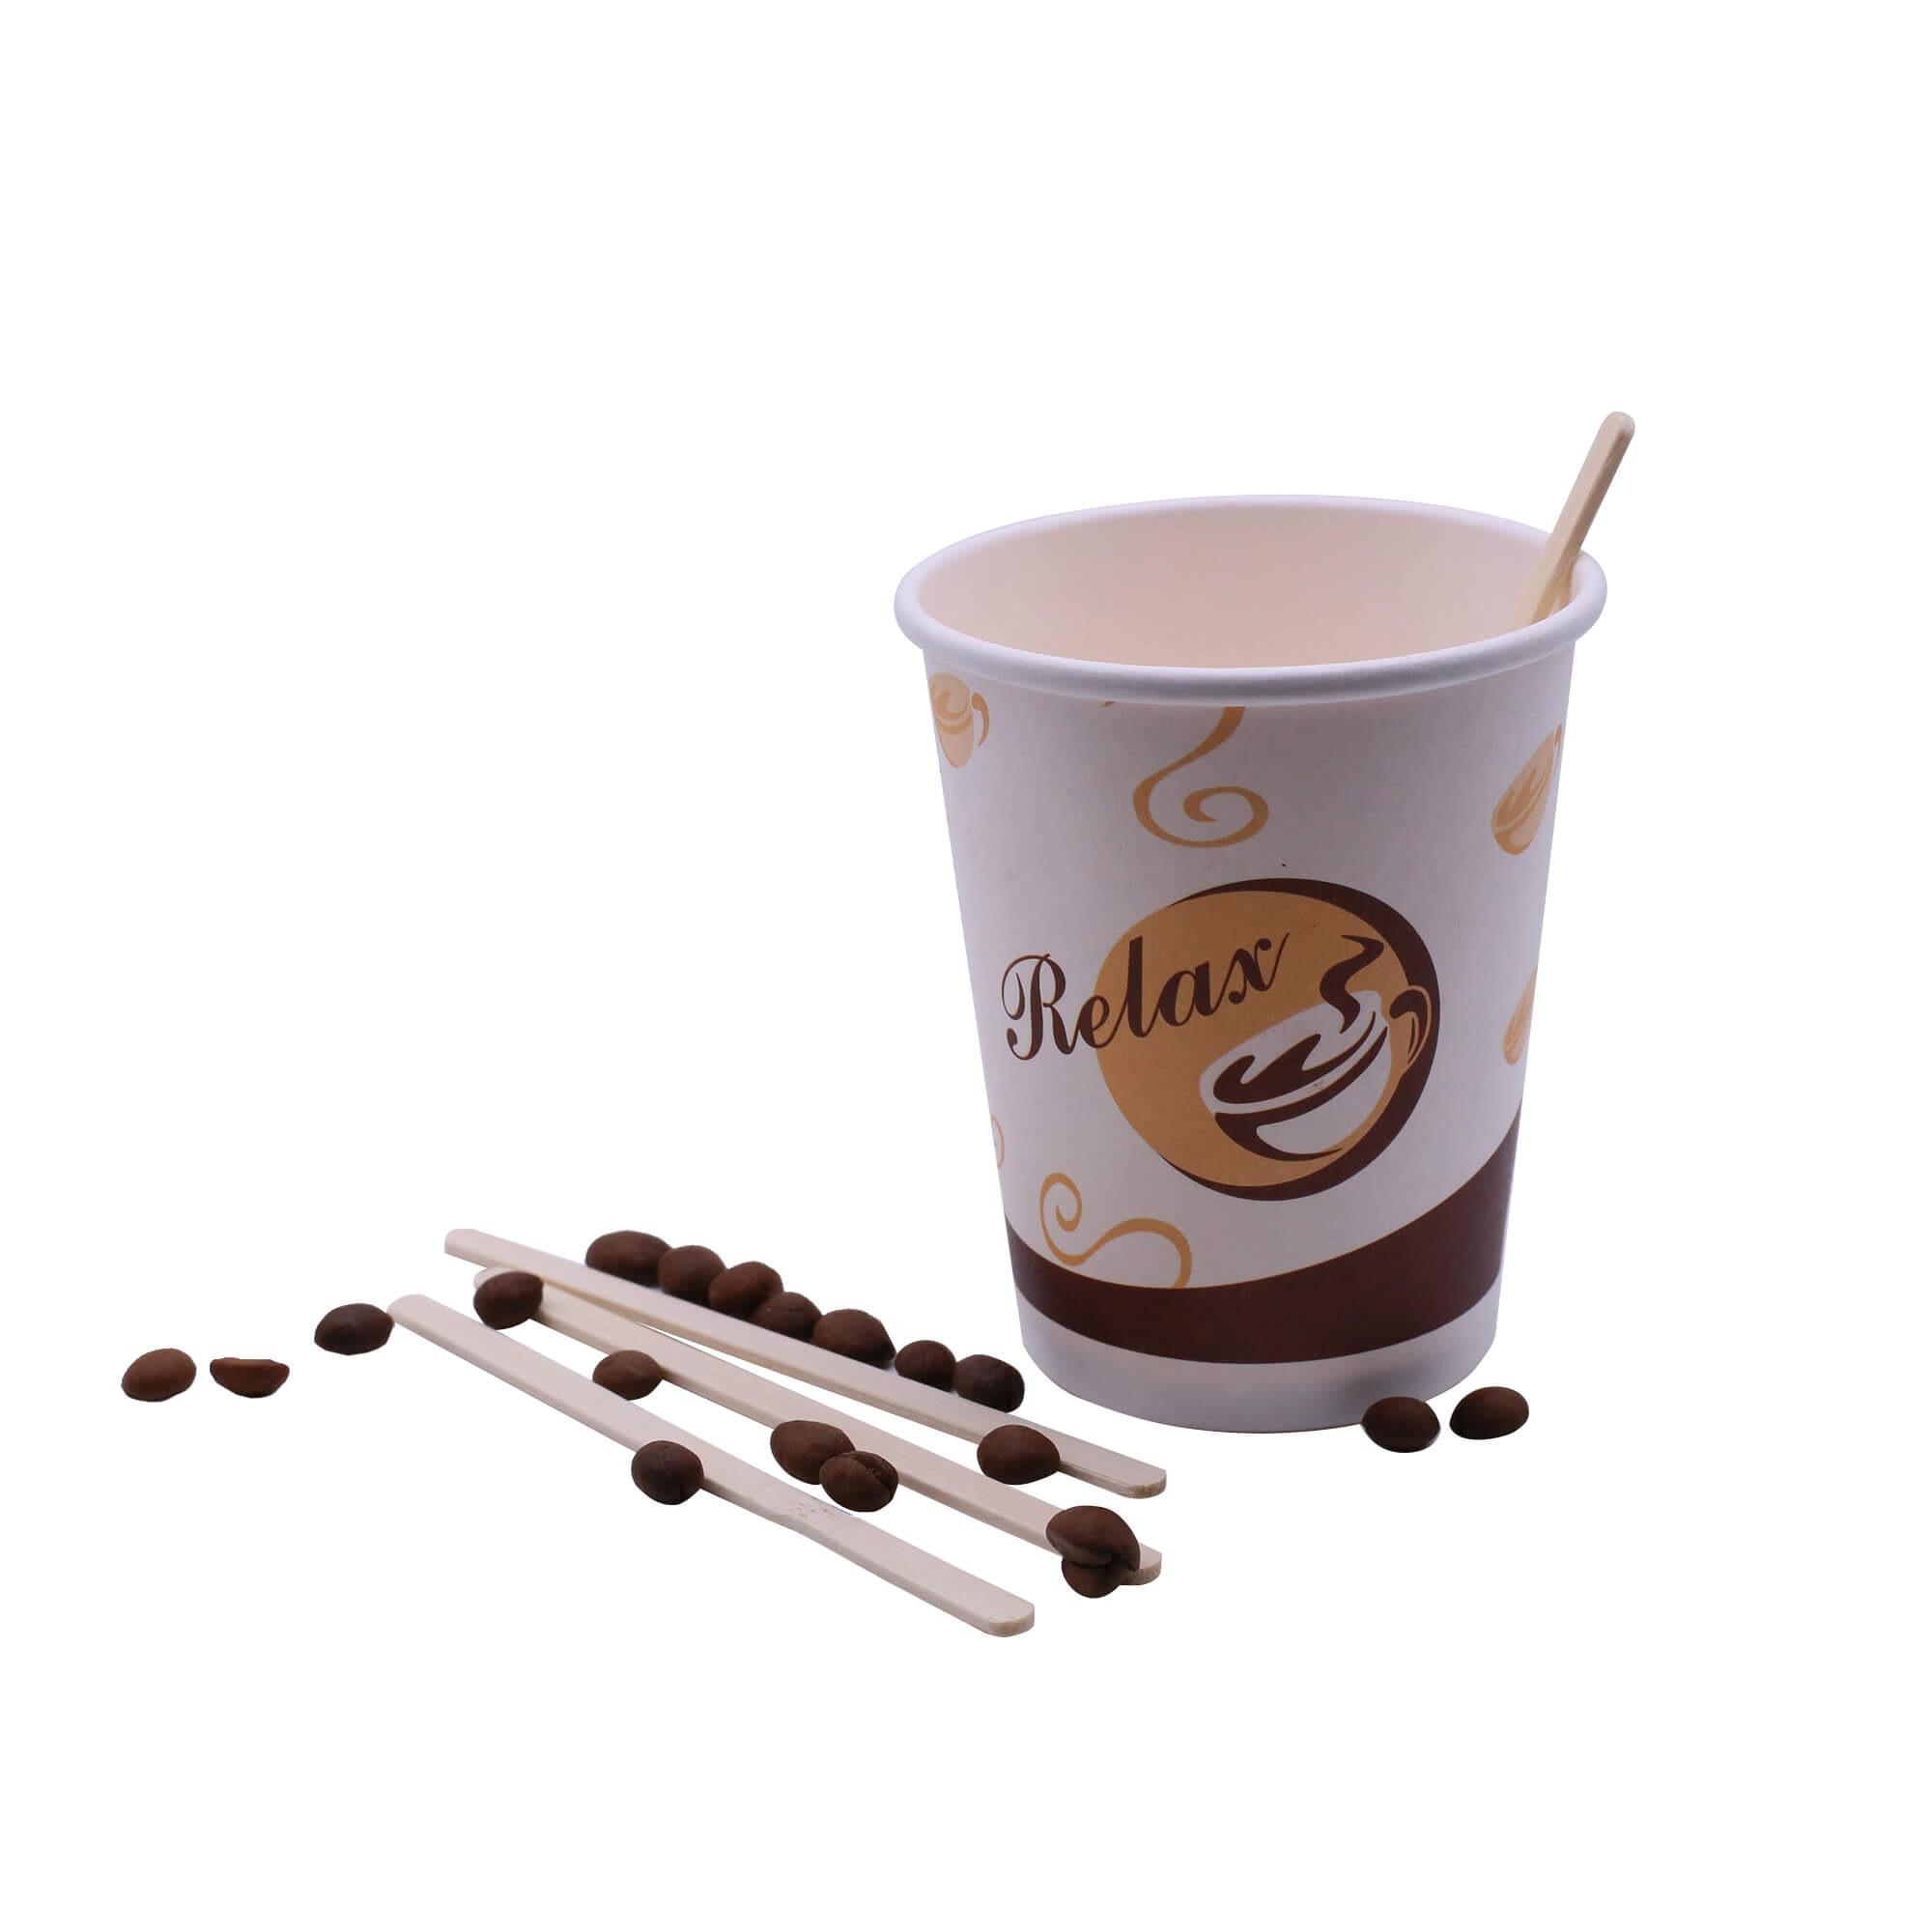 Wooden Coffee Stirrers Biodegradable Disposable Wholesale